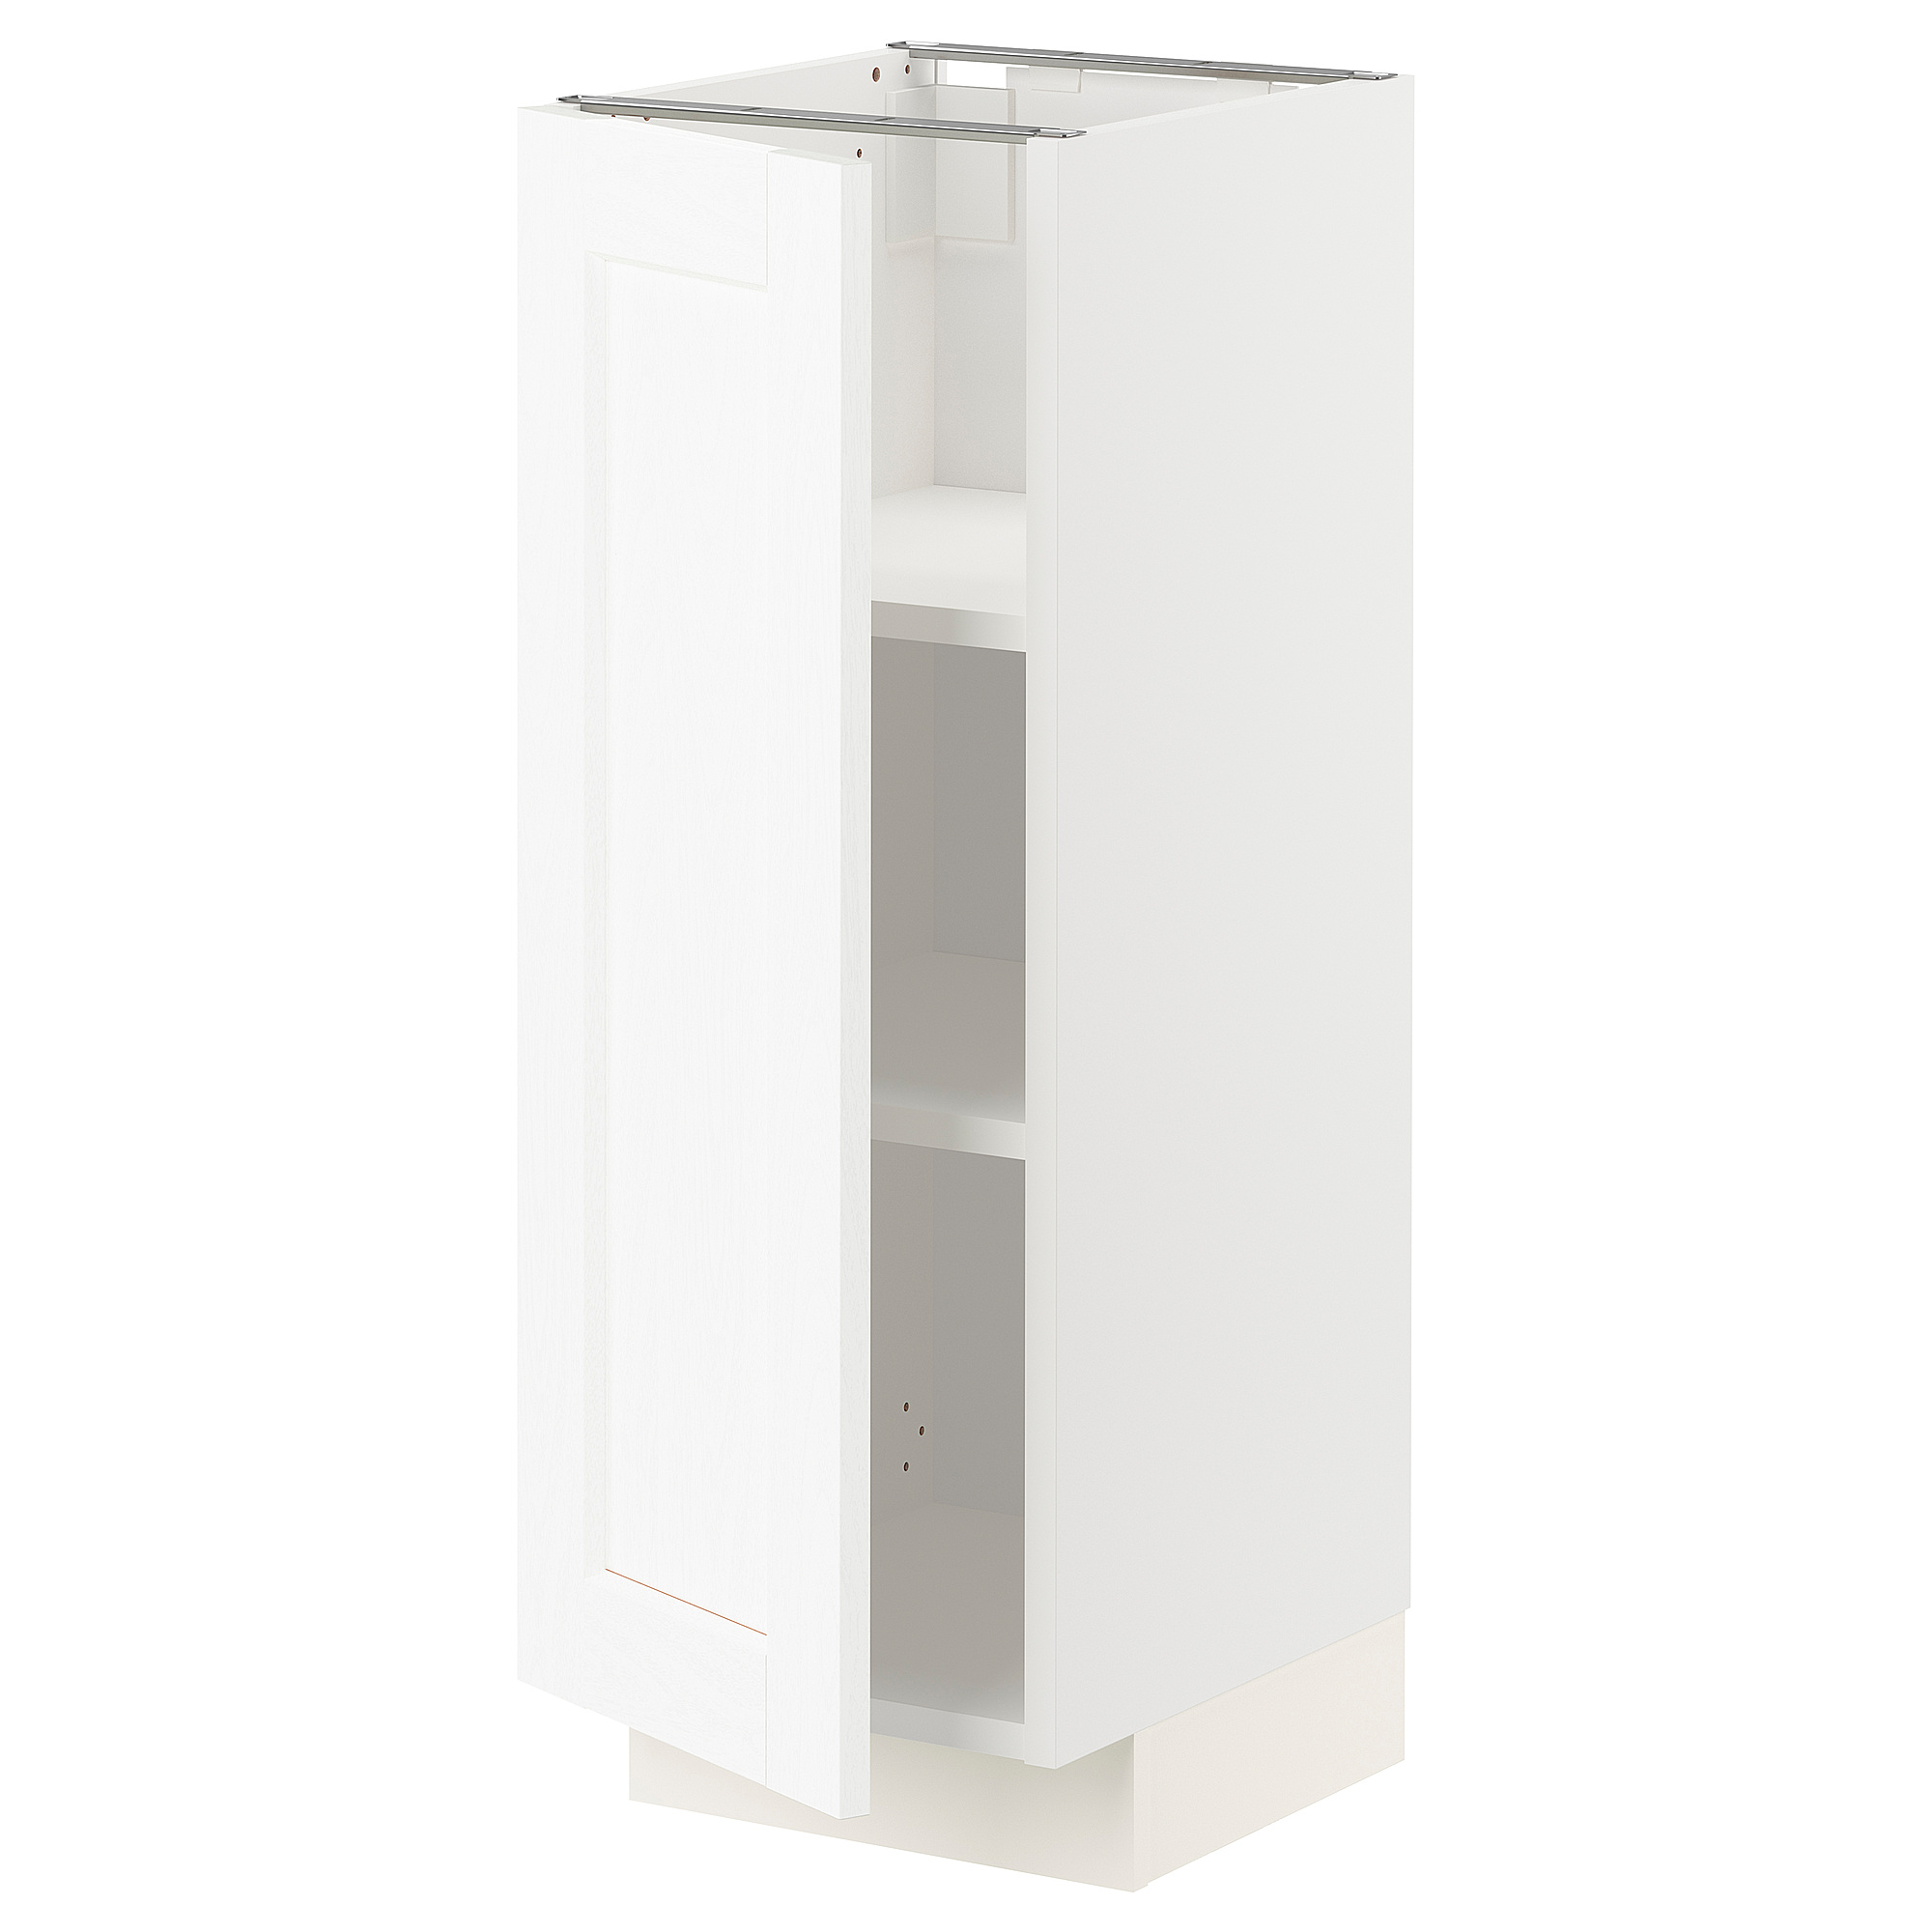 METOD base cabinet with shelves